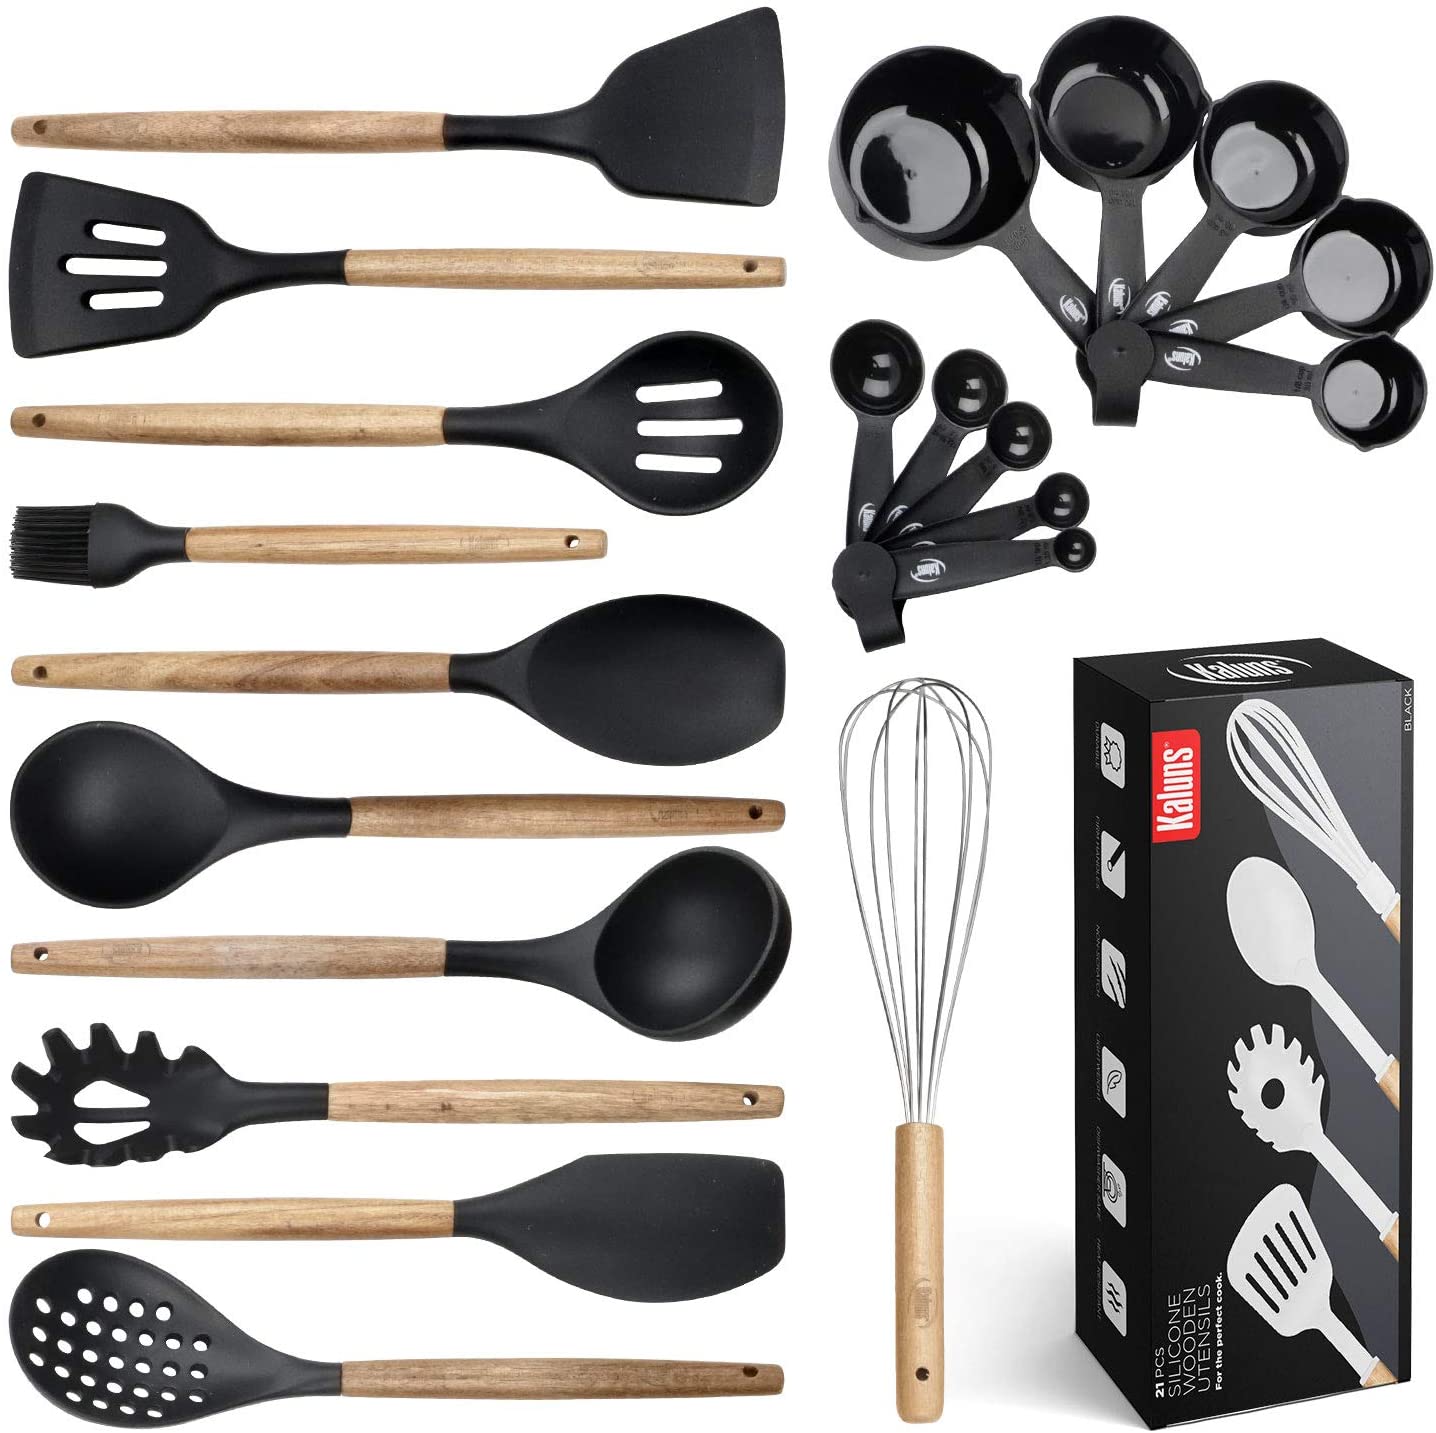  Silicone Cooking Utensils